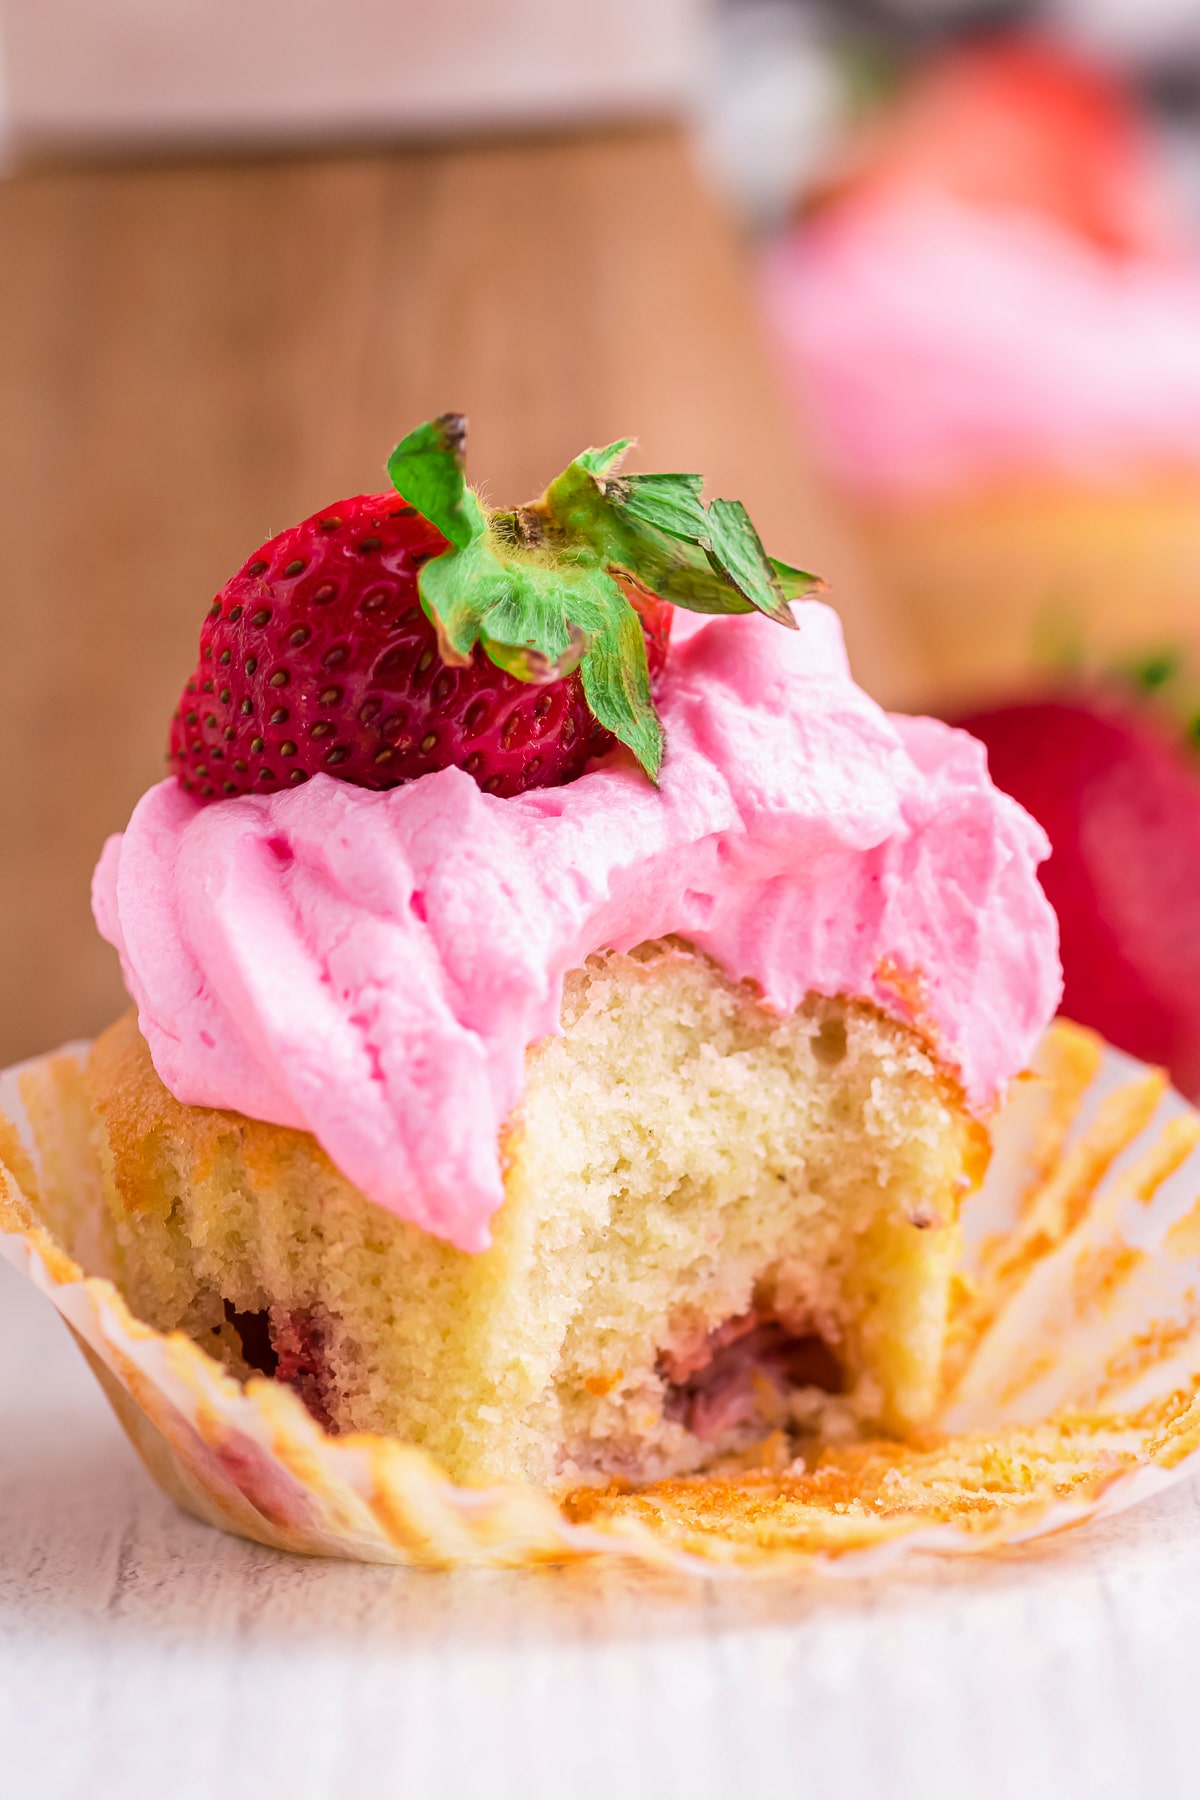 Photo showing a bite out of a Strawberry Cupcake on a white wooden table top